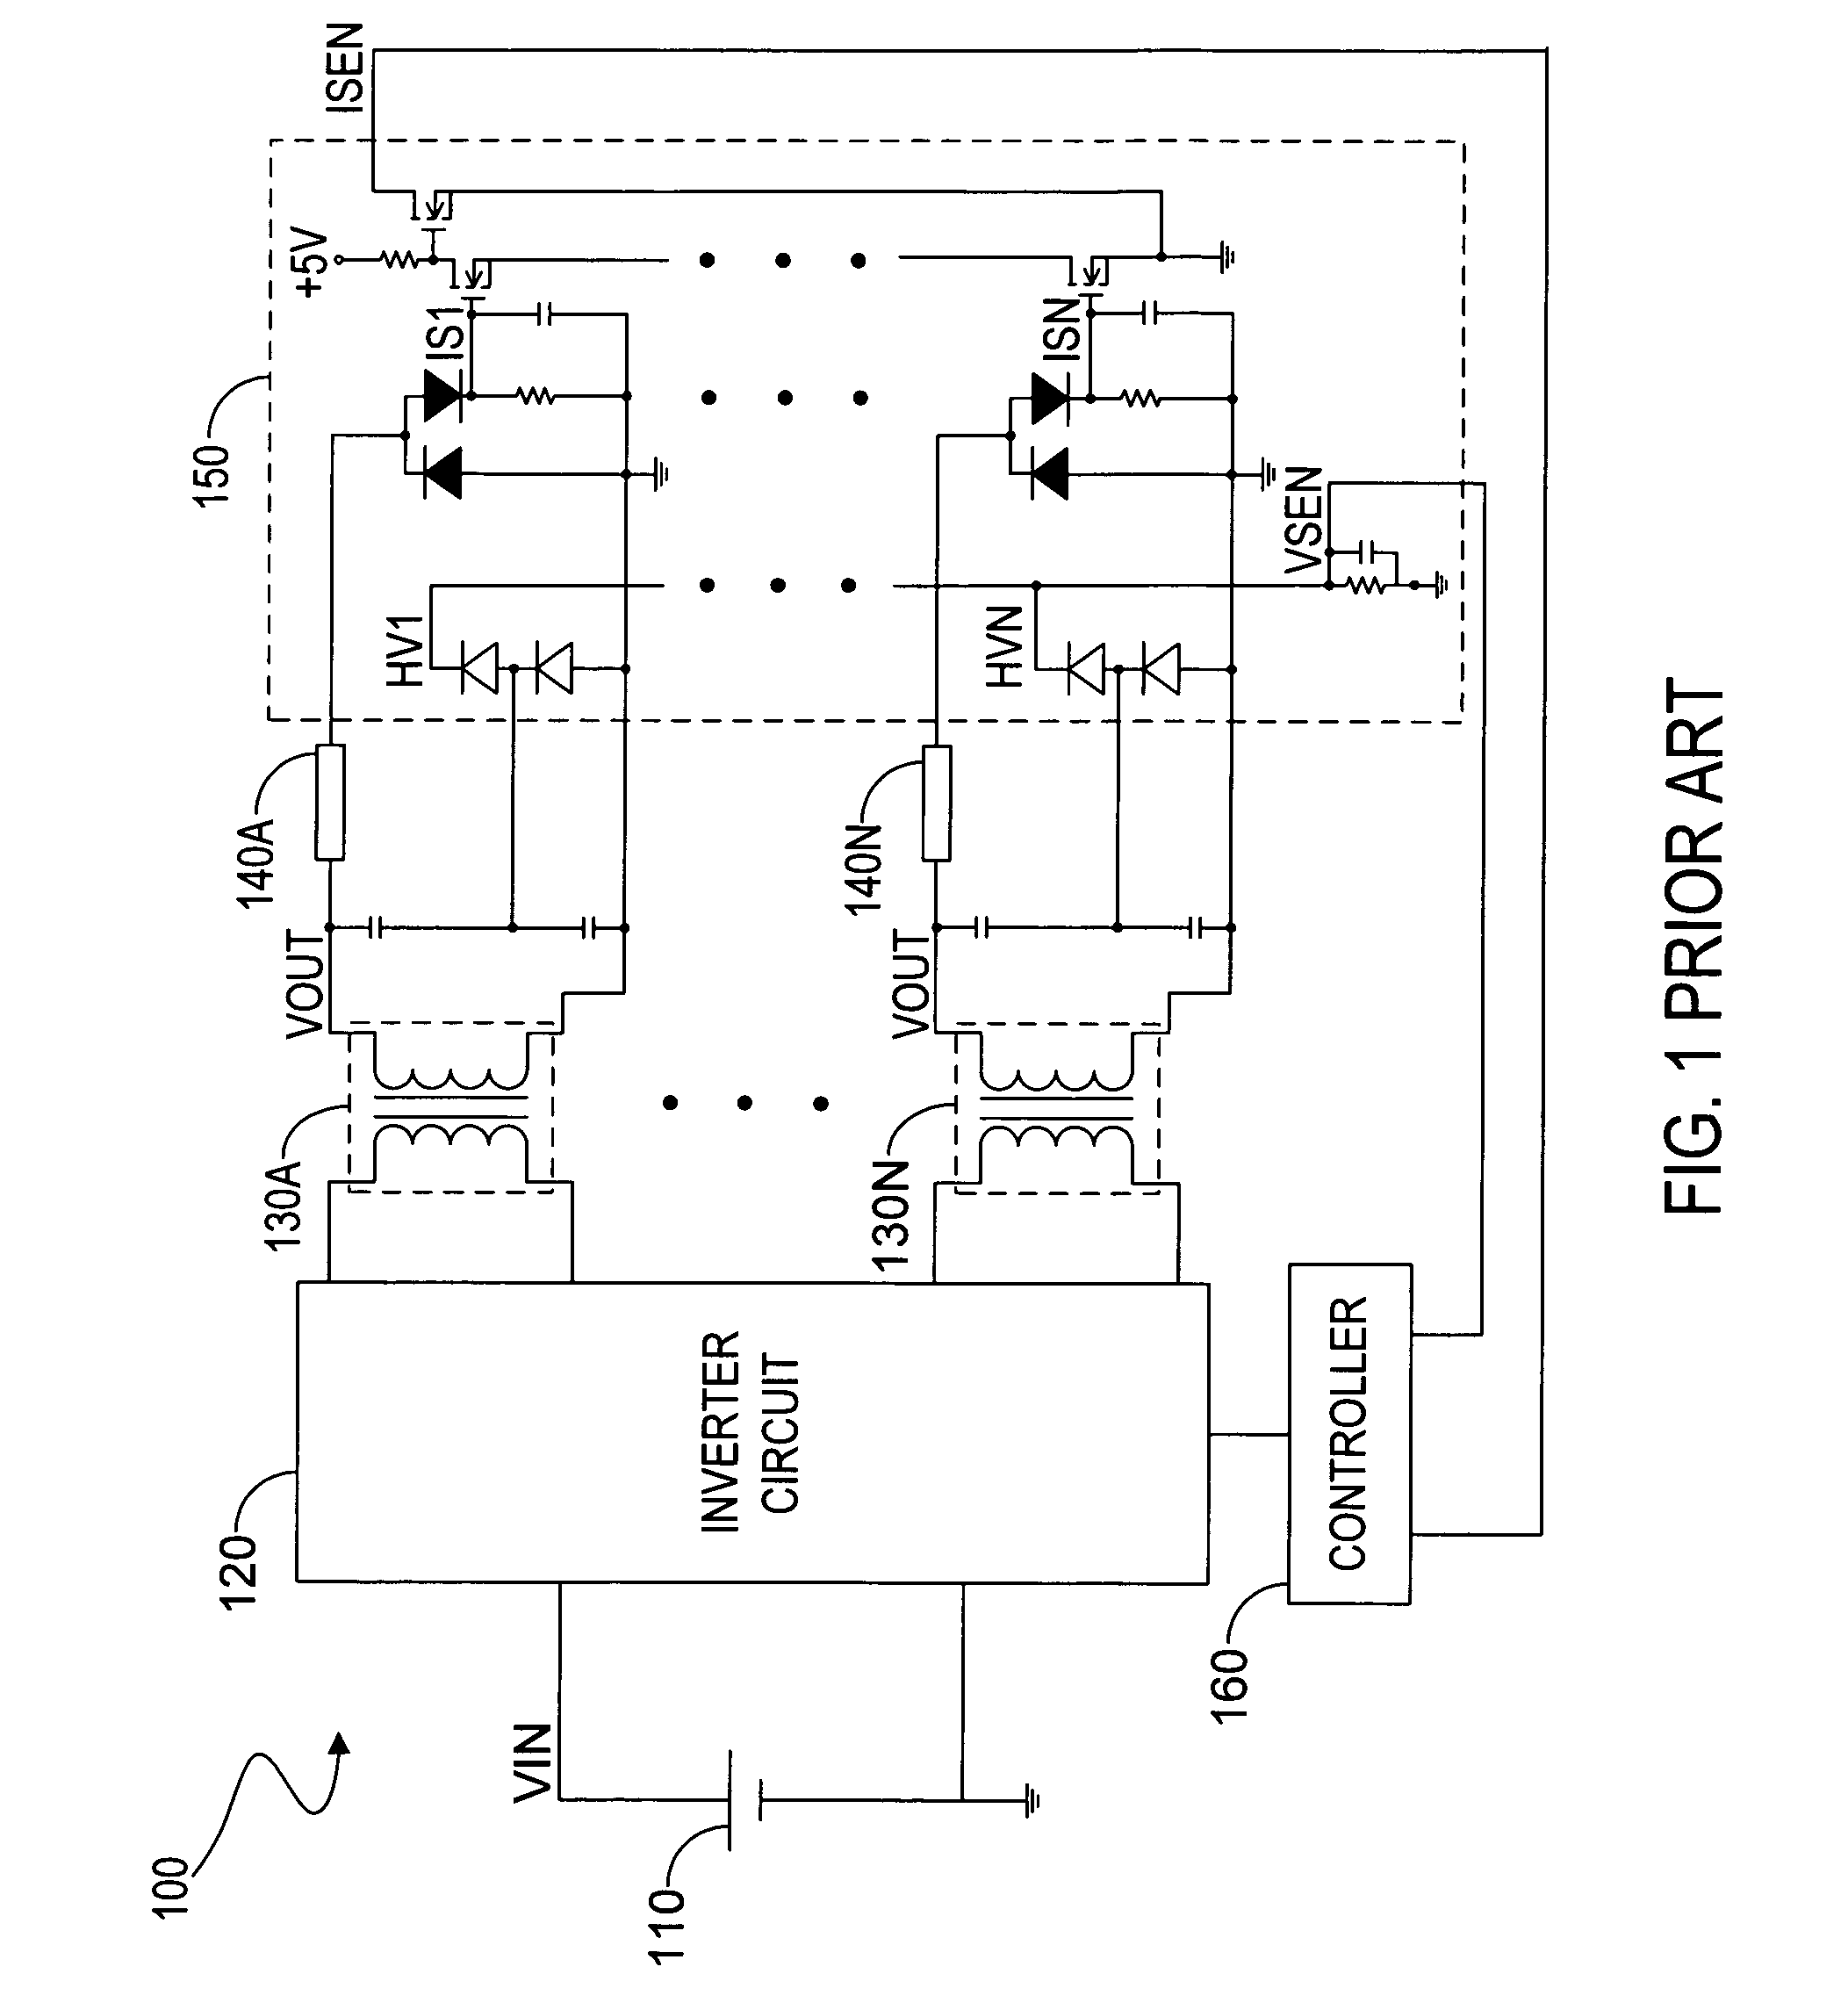 Circuit structure for LCD backlight